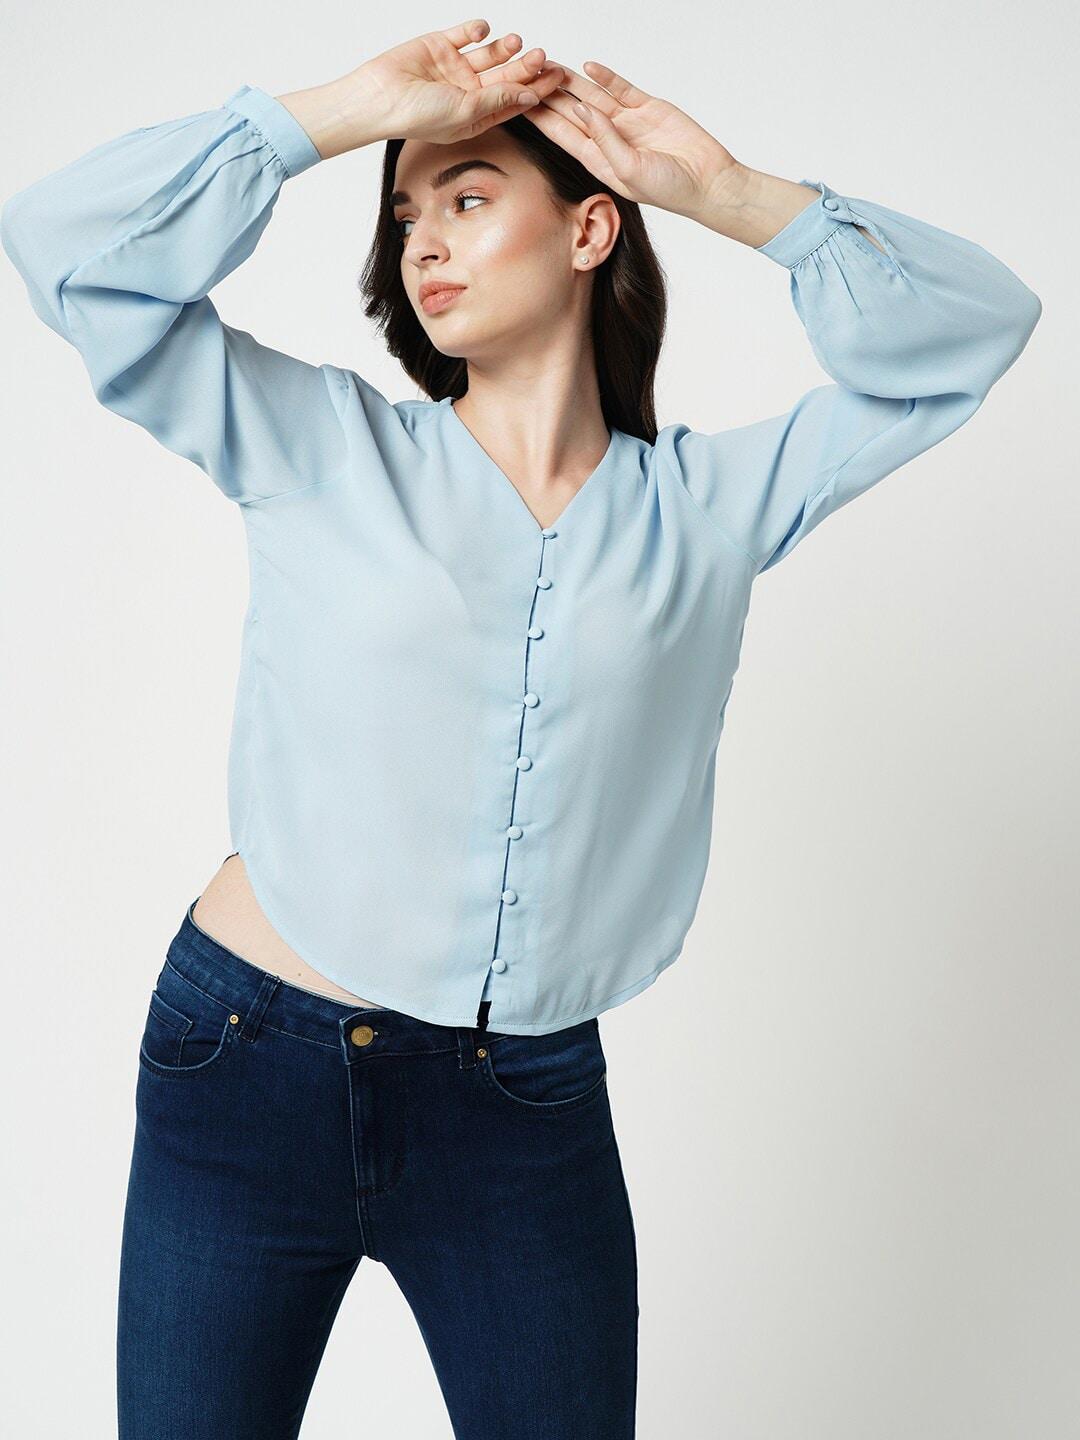 only v-neck cuffed sleeves shirt style top